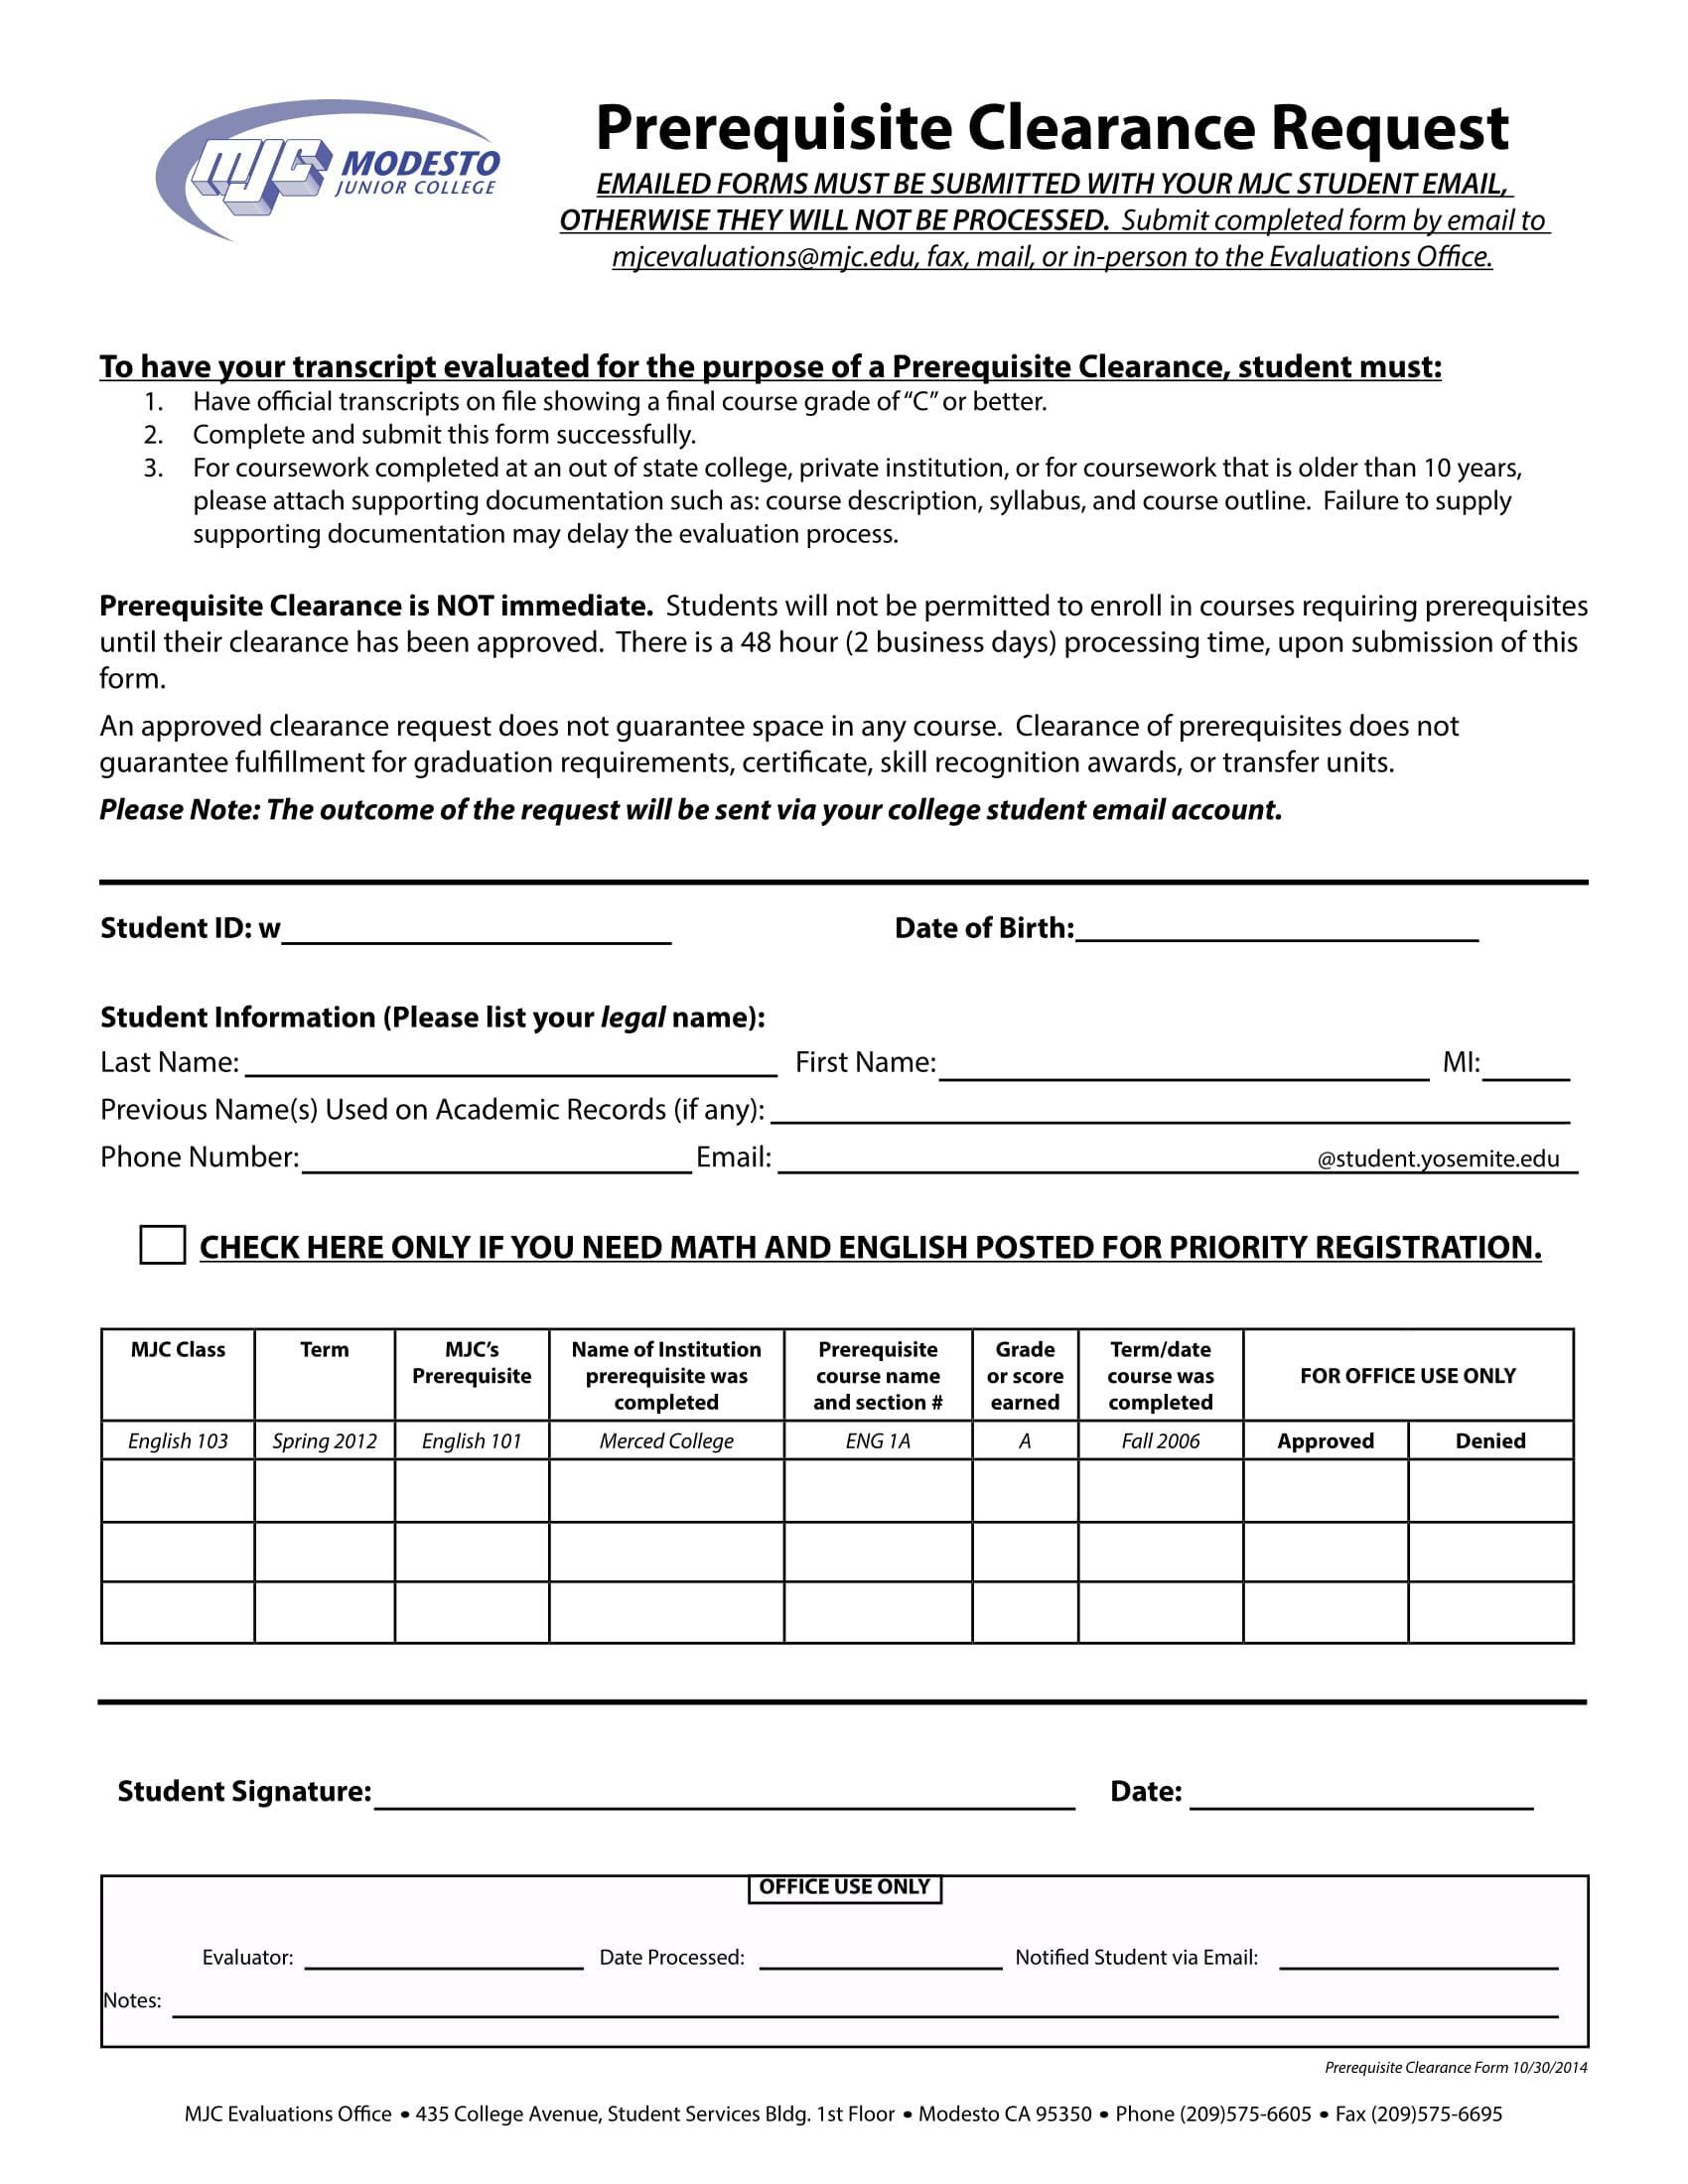 prerequisite clearance request form 1